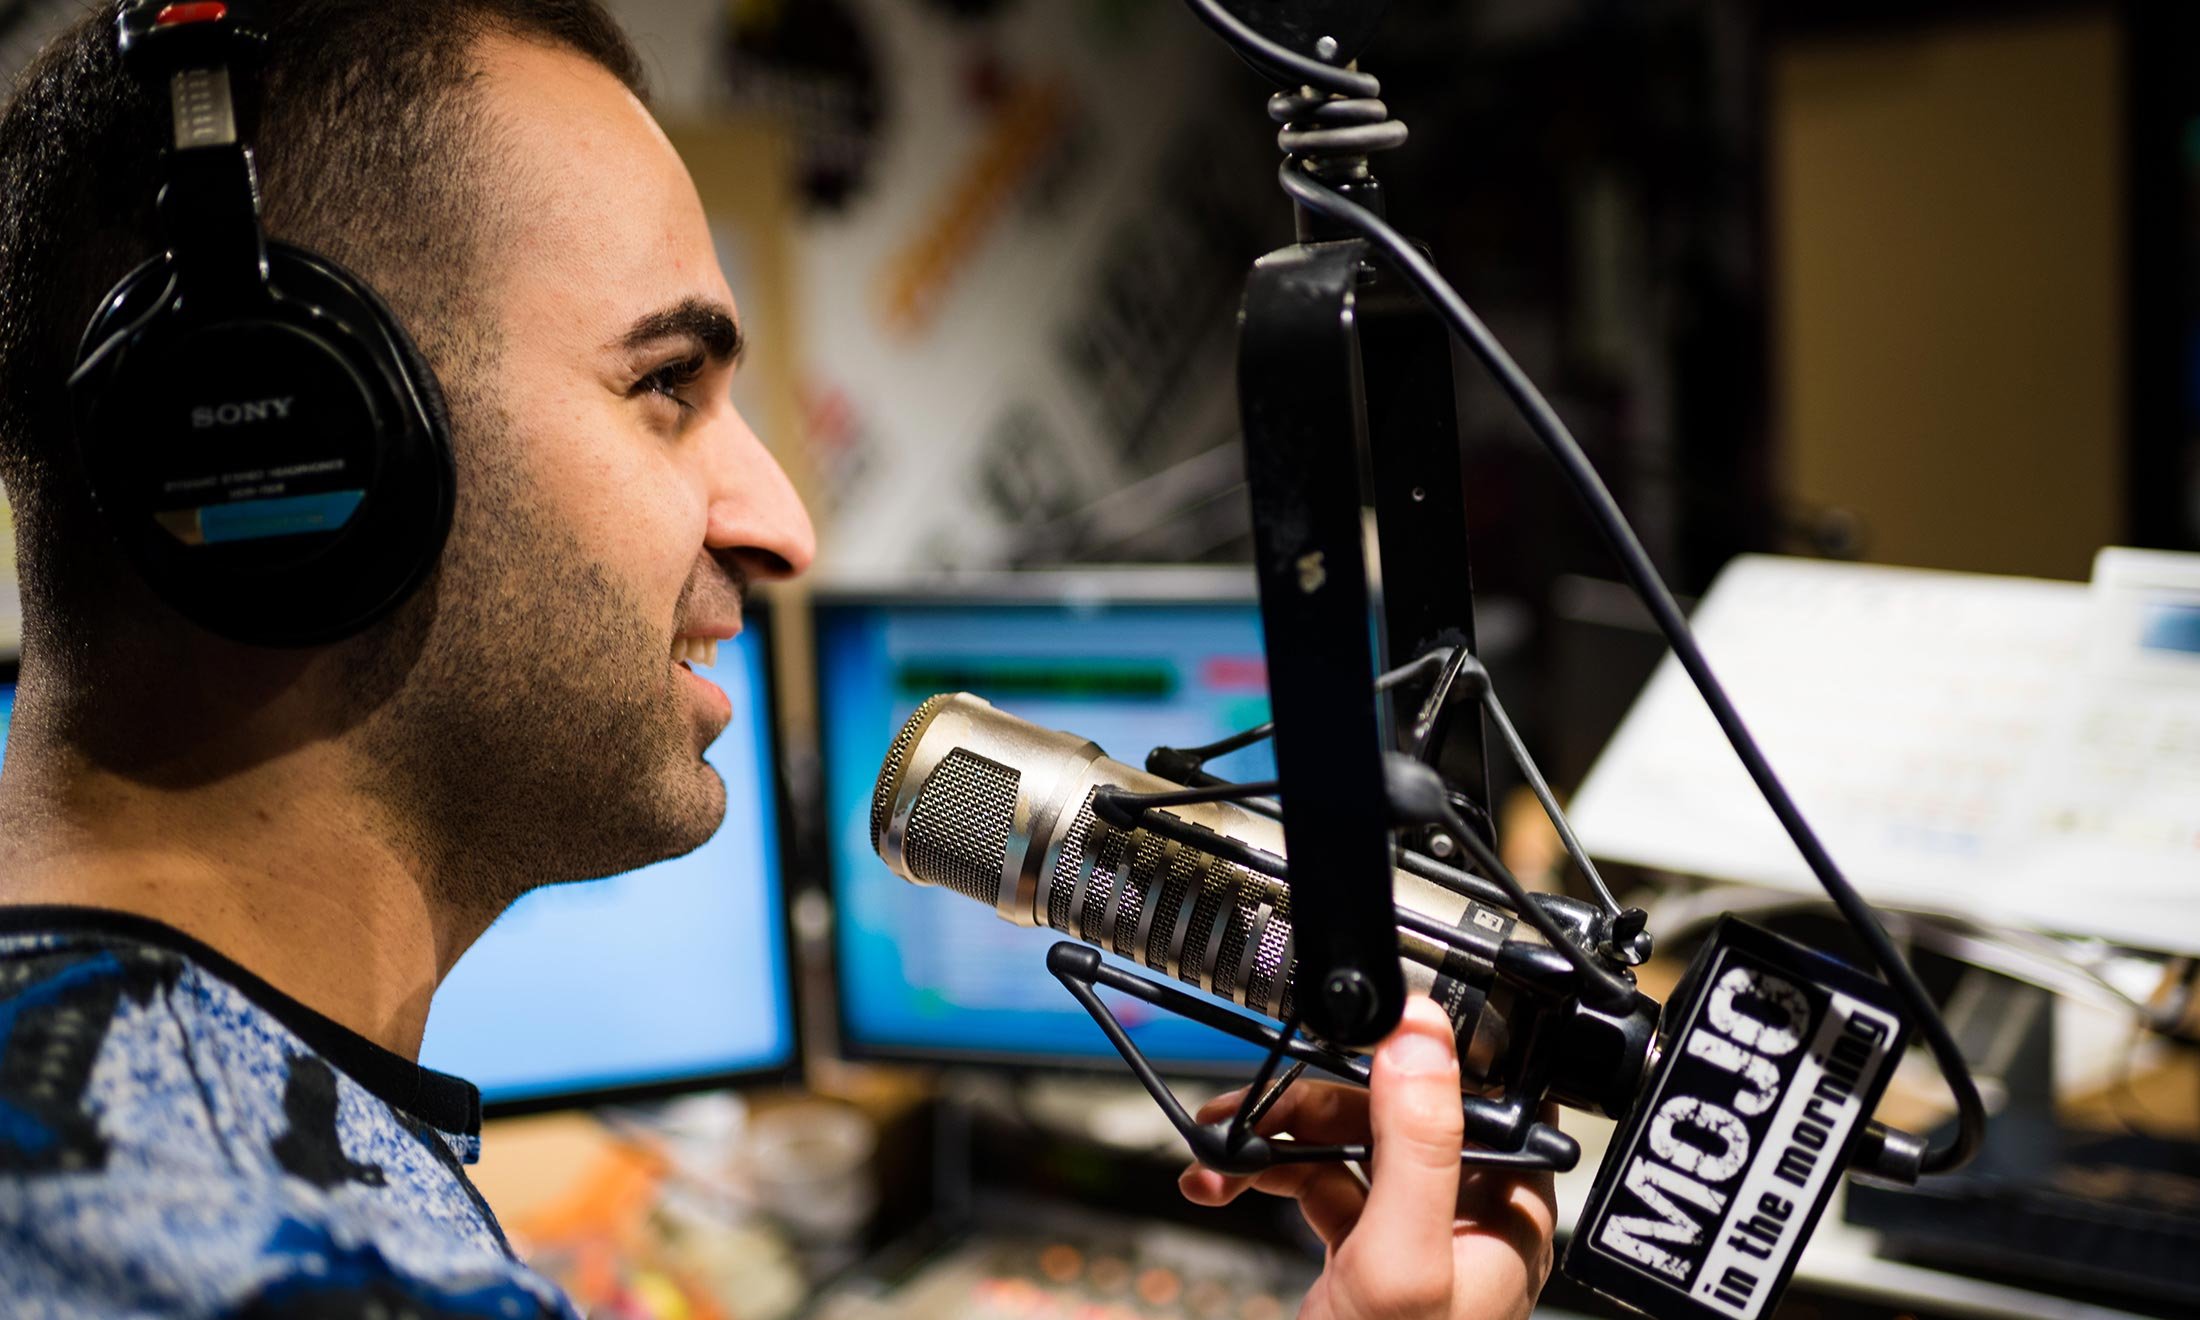 Joe Namou listens for sound with his headphones in the iHeartRadio studio 